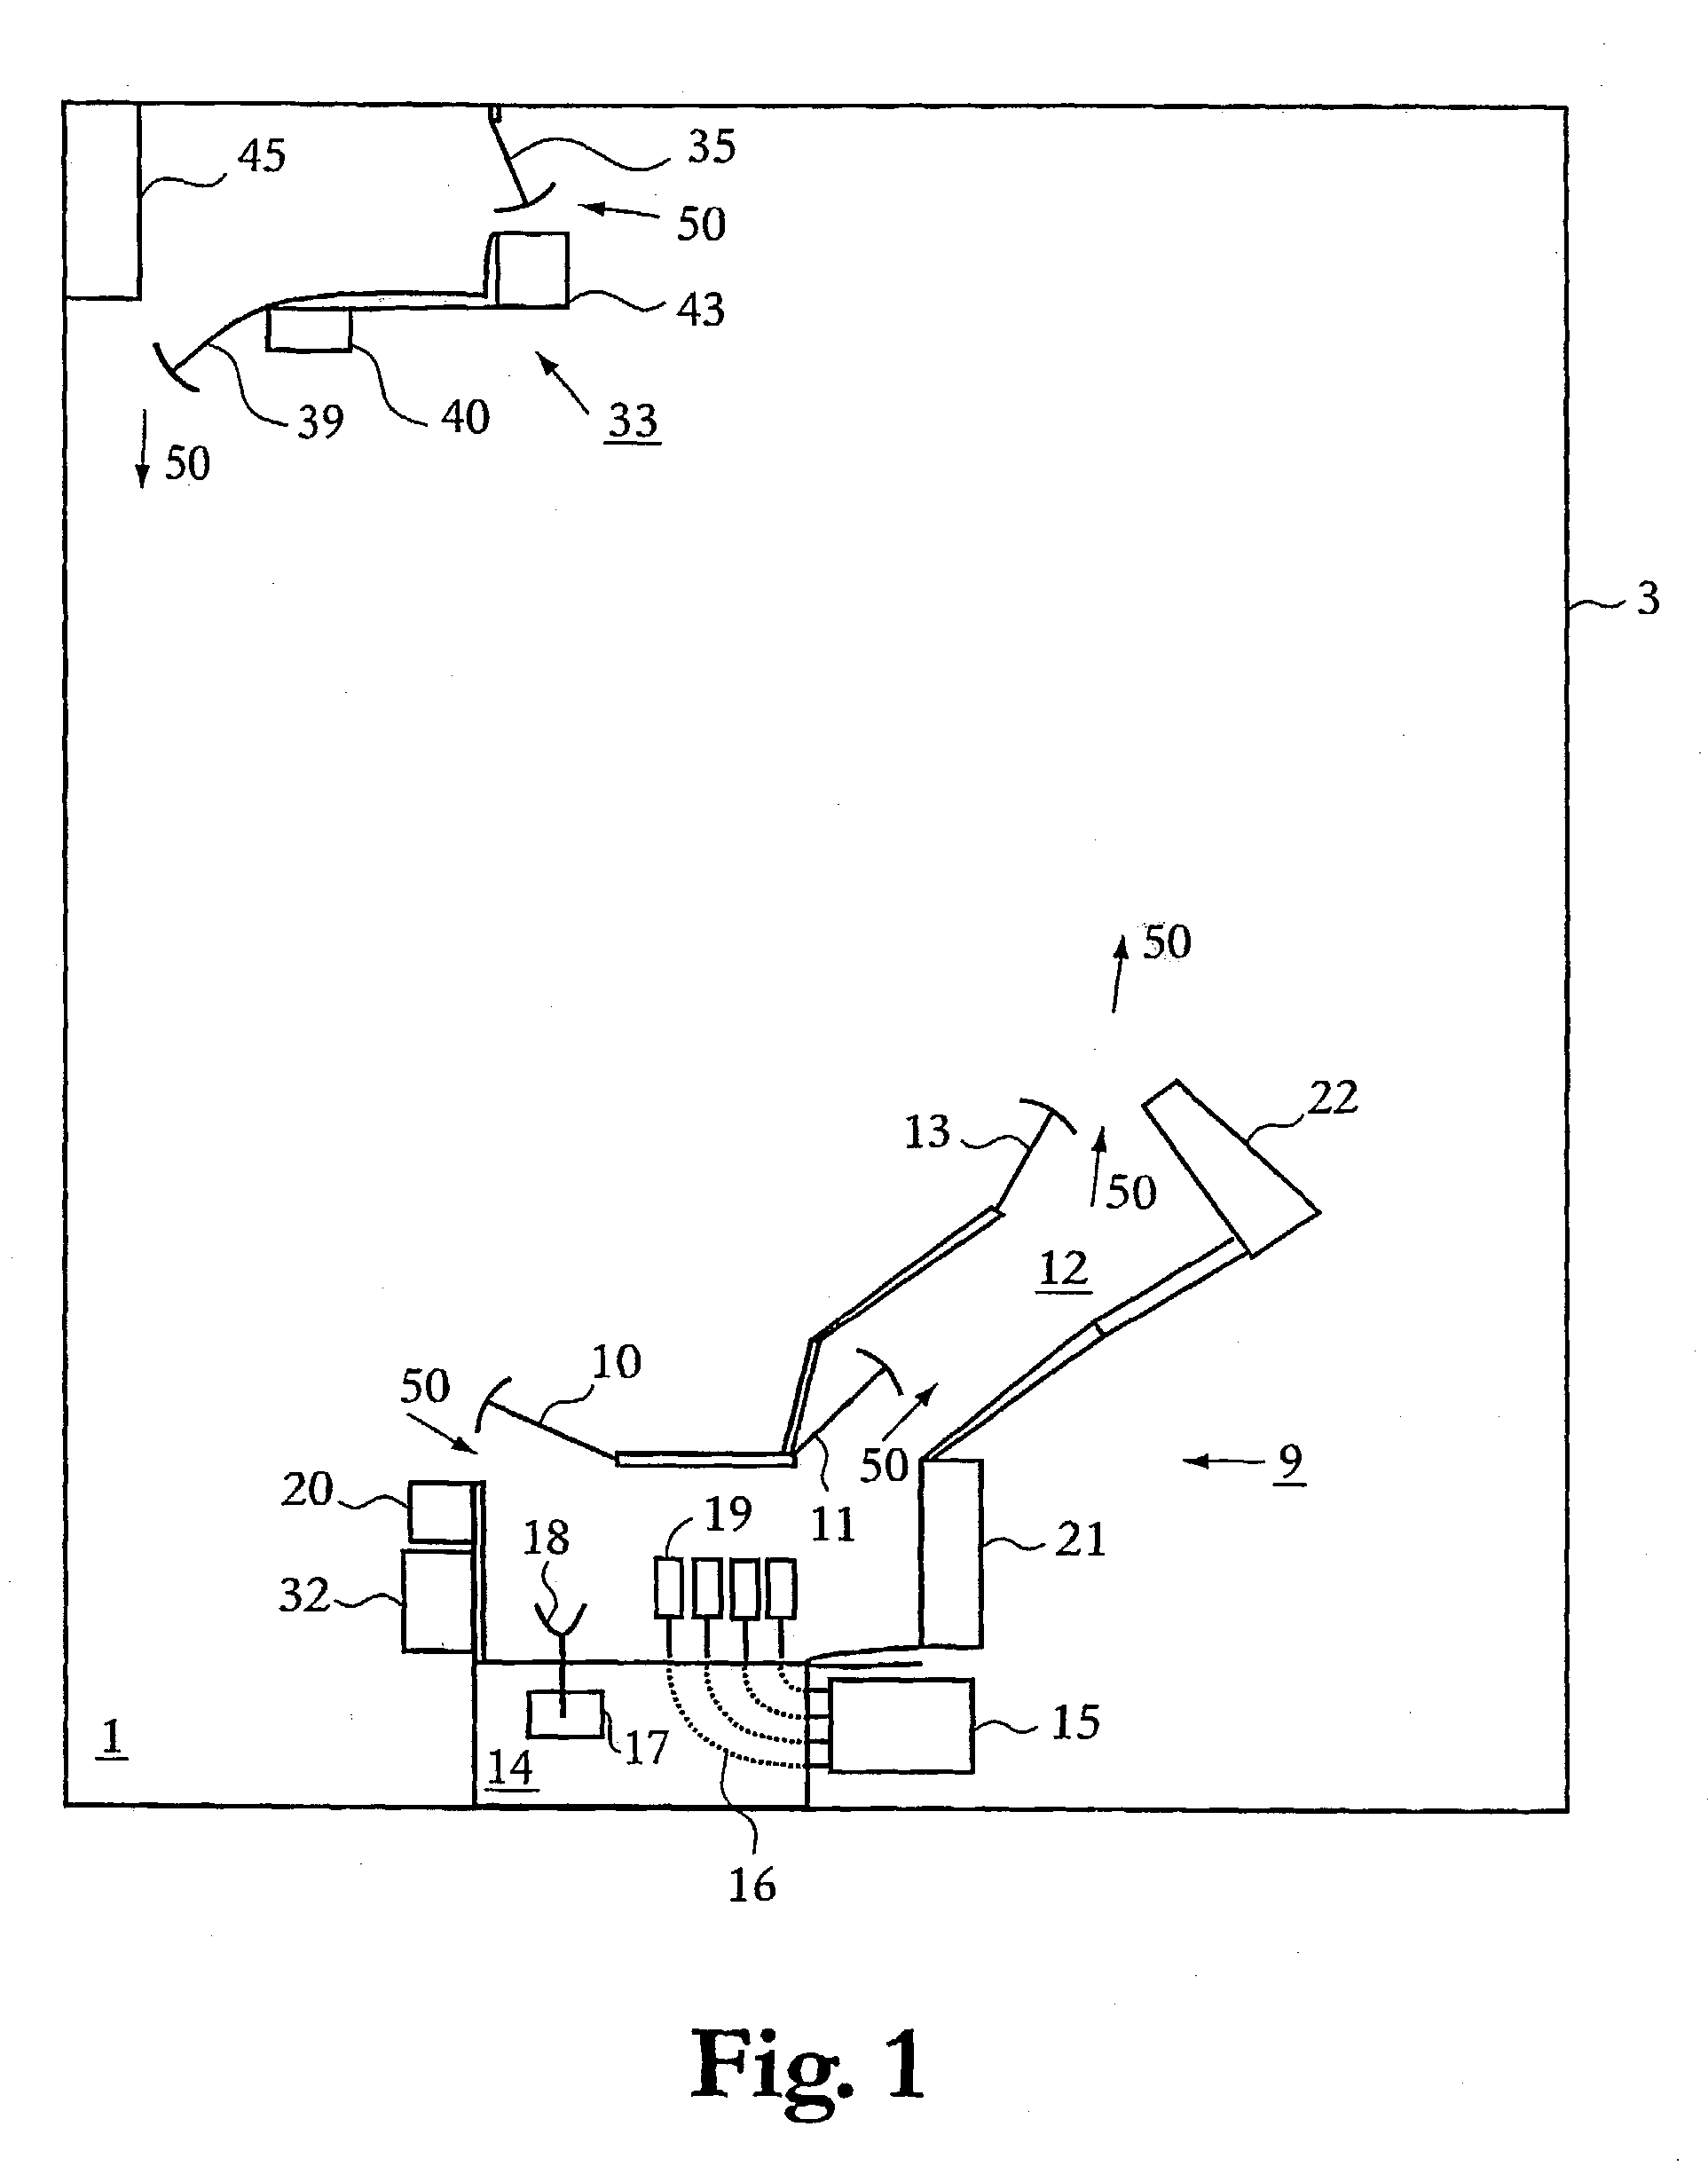 Method of milking and milking parlor